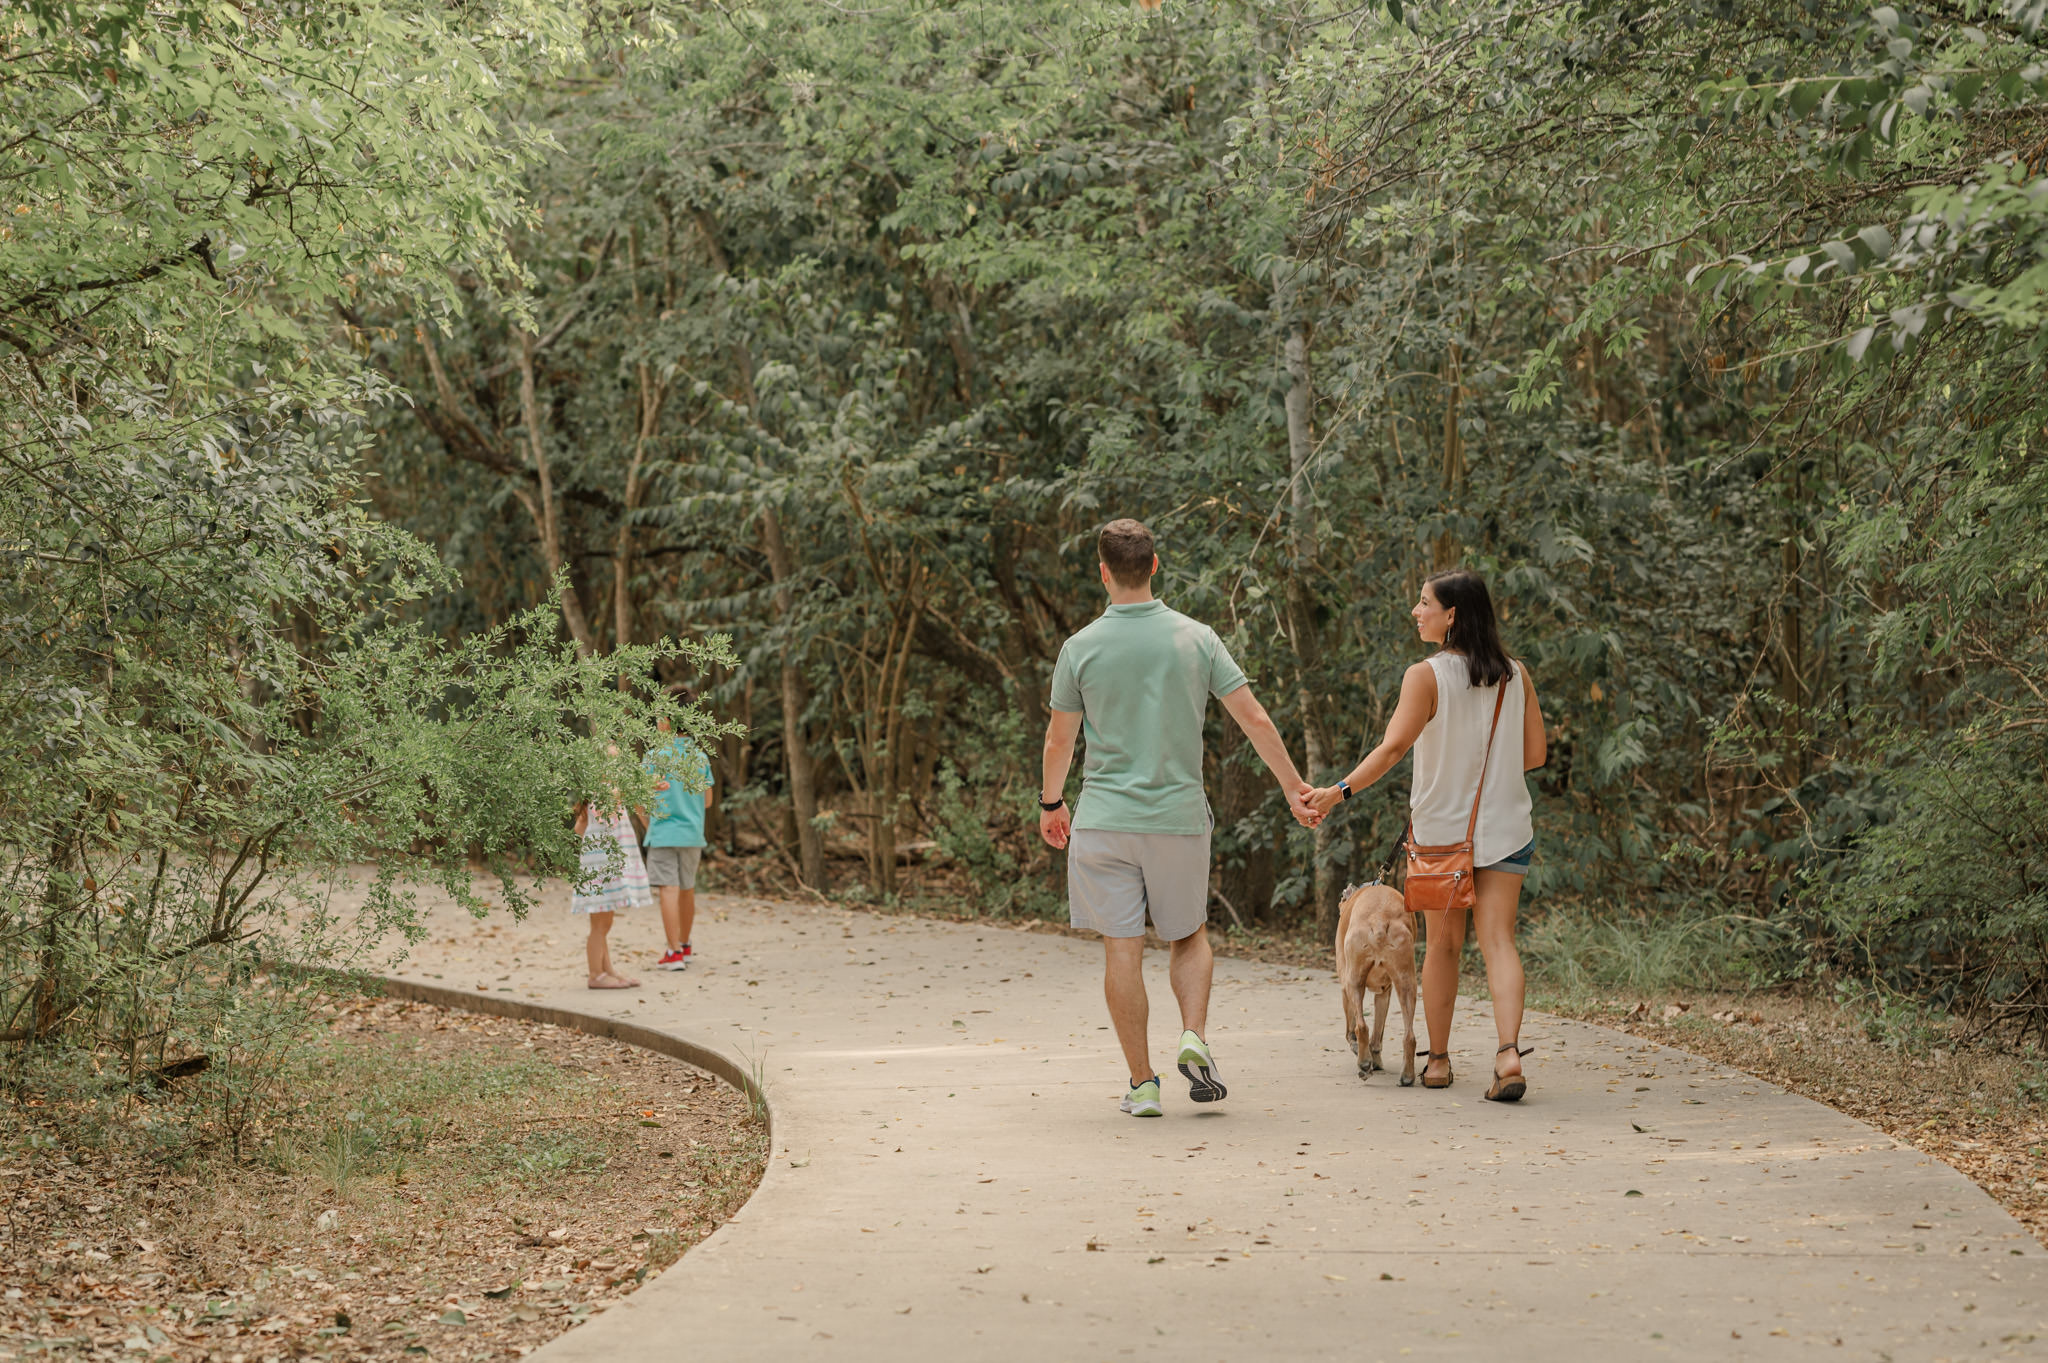 Family walks down a path away from the camera on their way to a San Antonio splash pad.